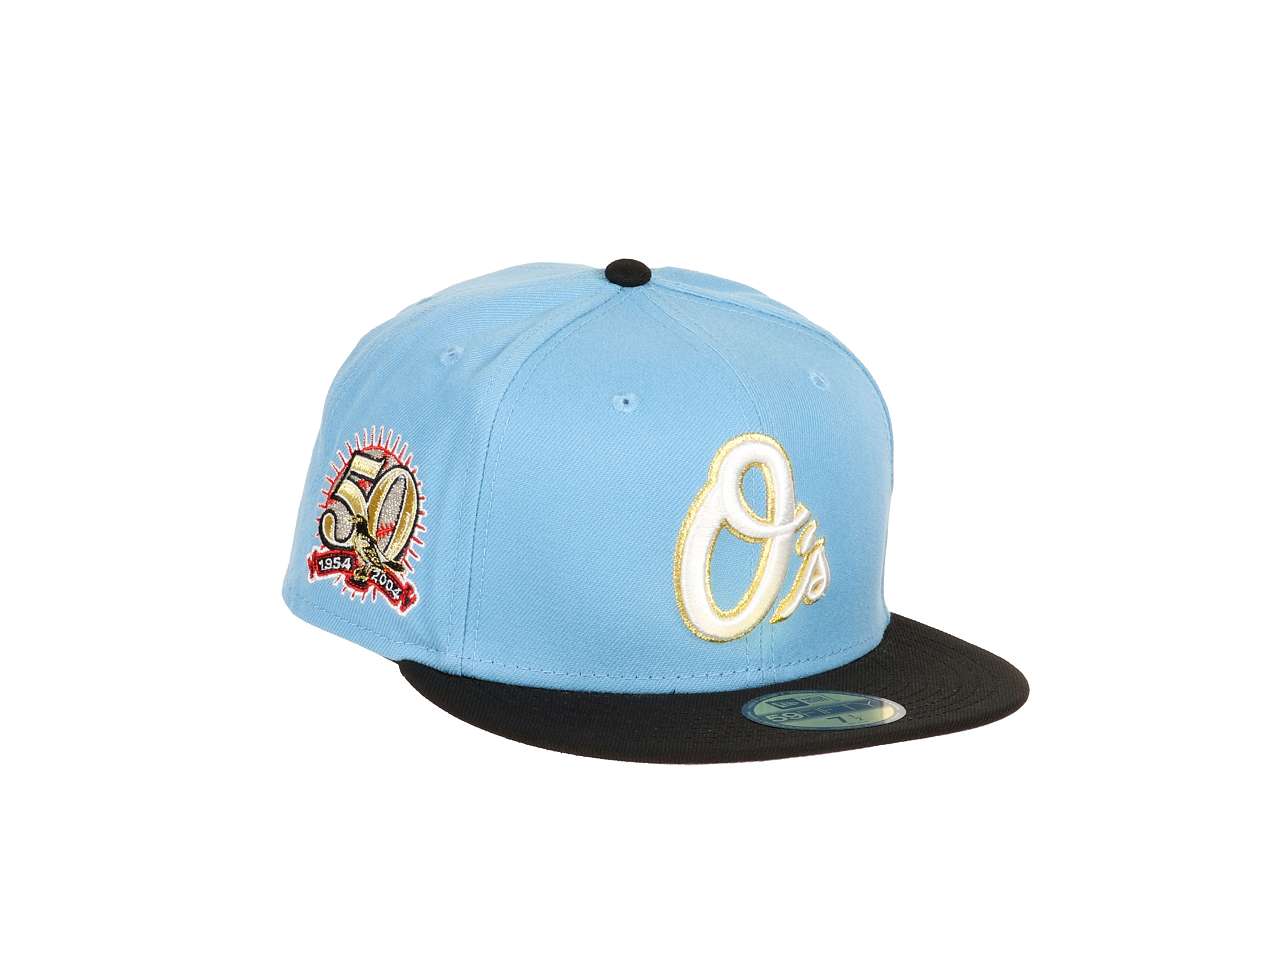 Baltimore Orioles MLB 50 Years Sidepatch Cooperstown Skyblue Black 59Fifty Basecap New Era